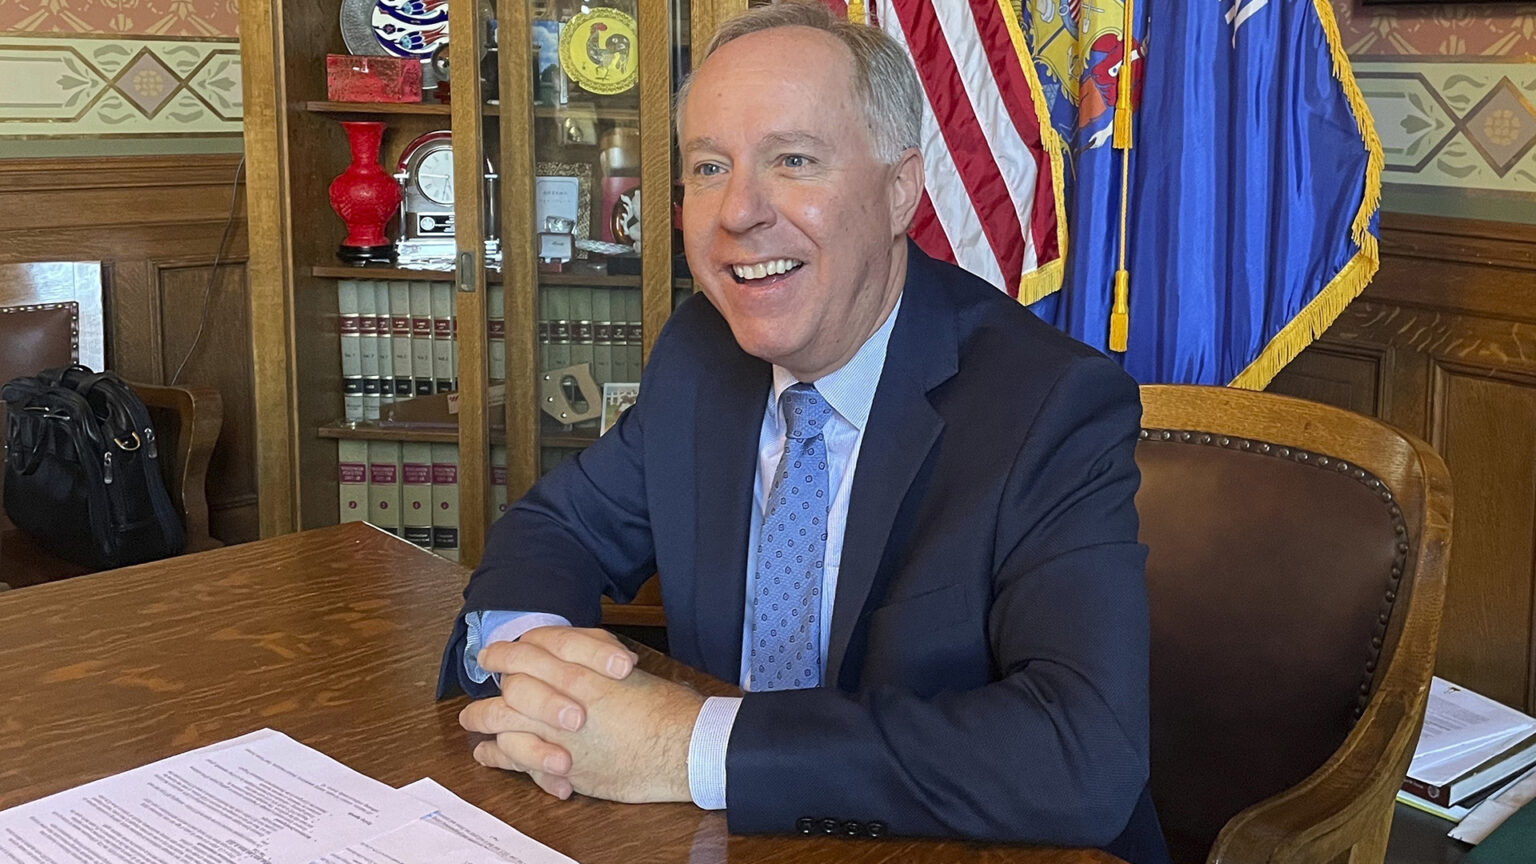 Robin Vos sits in a wood and leather curved back chair and rests folded hands on a wood table with papers on its surface, in a room with wood panels, wall paper, the U.S. and Wisconsin flags, and a cabinet with law books and decorative items.